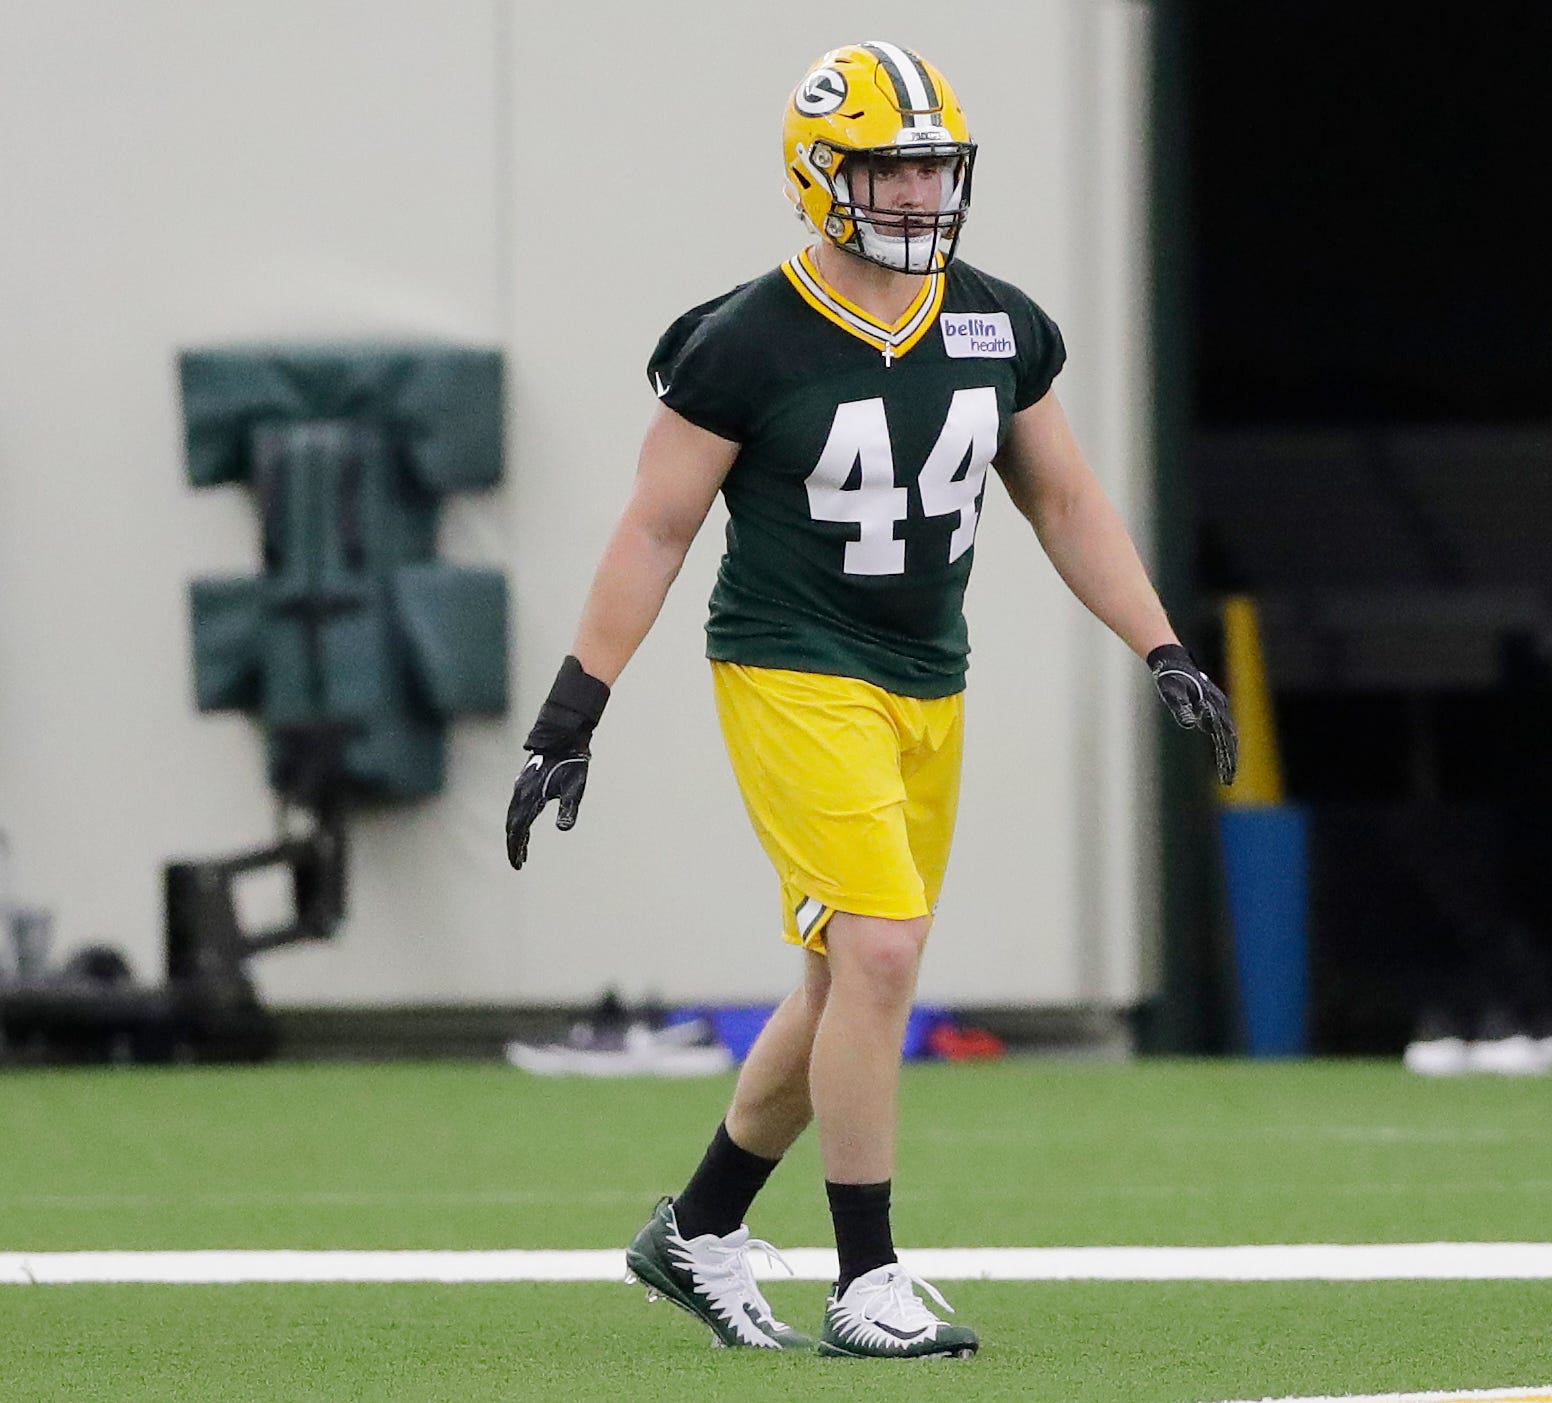 Green Bay Packers linebacker Ty Summers (44) during practice at rookie minicamp at the Don Hutson Center on Friday, May 3, 2019 in Ashwaubenon, Wis.
Adam Wesley/USA TODAY NETWORK-Wis